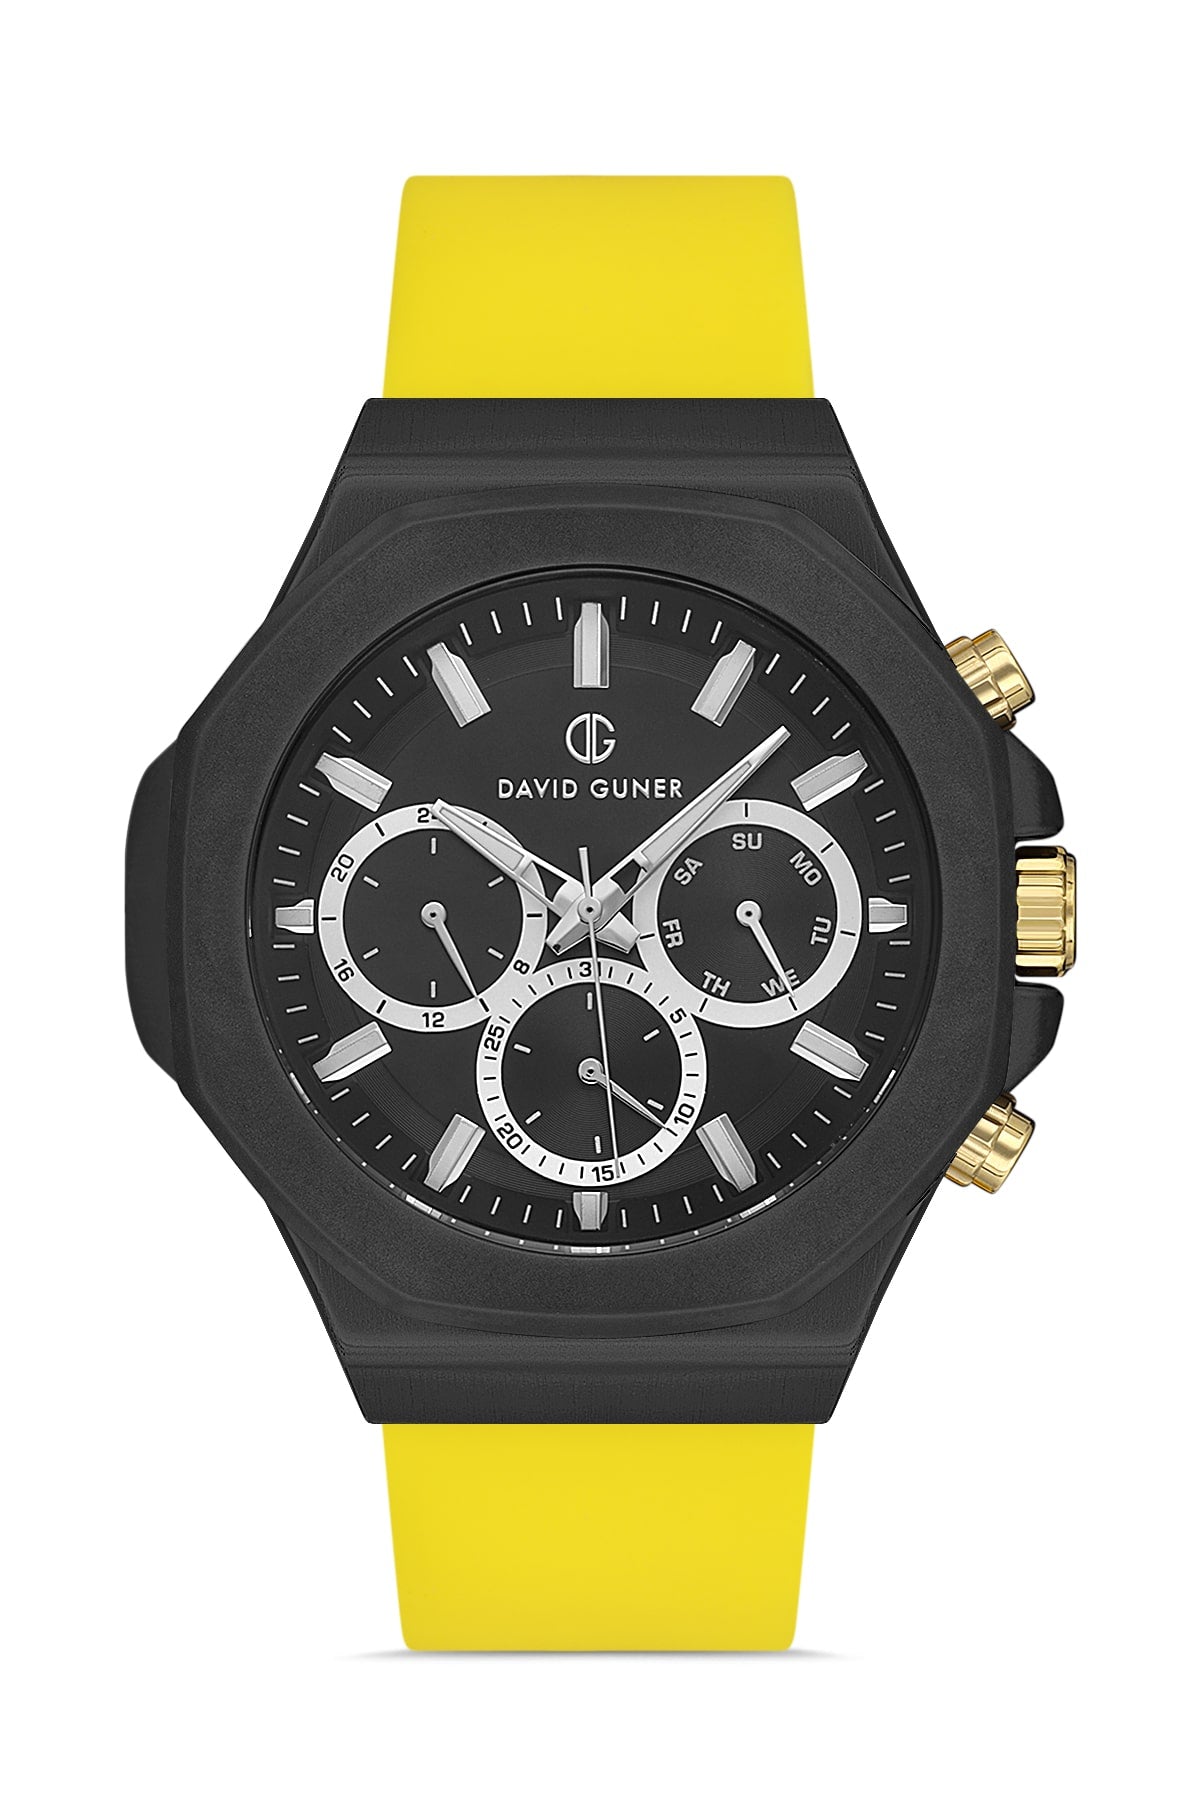 DAVID GUNER Multifunctional Men's Watch with Black Coated Yellow Silicone Strap